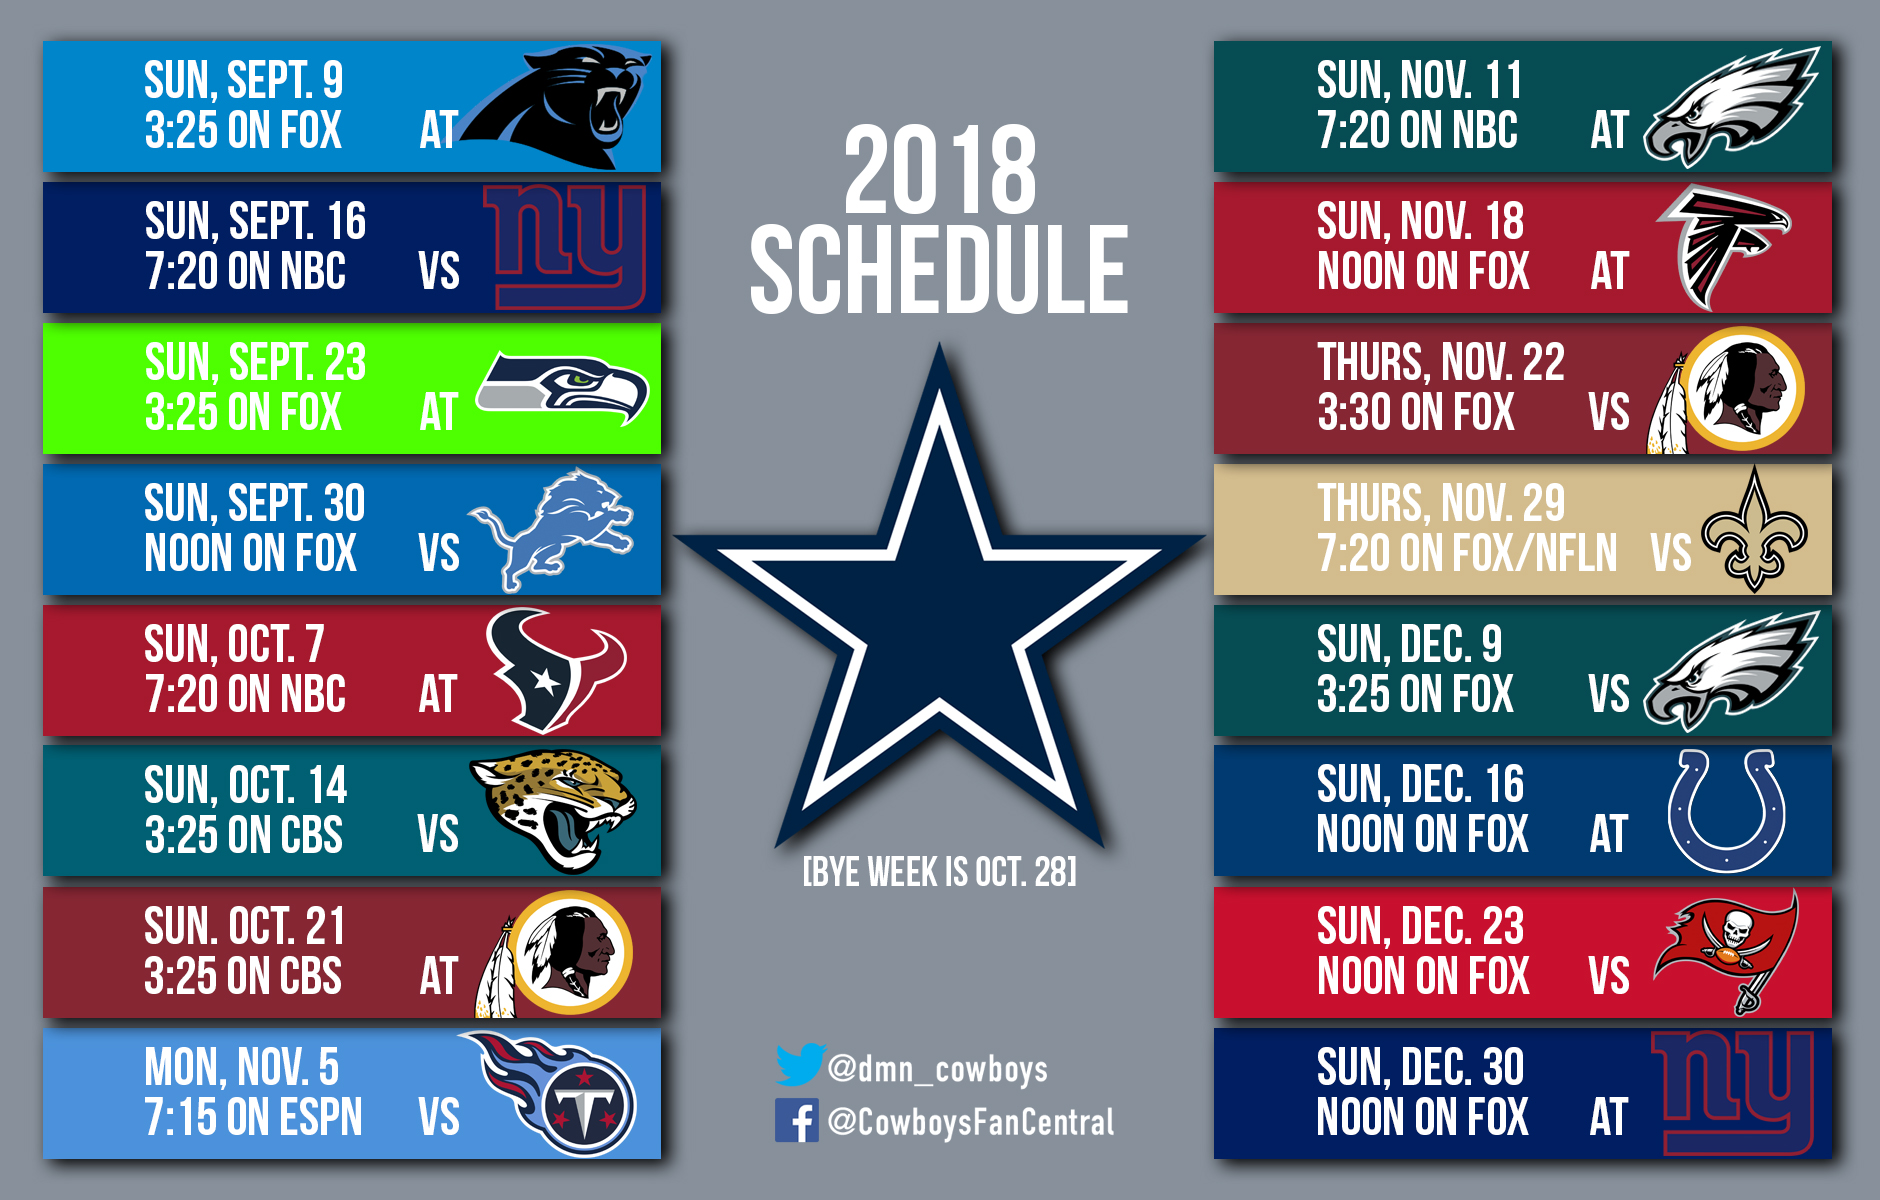 10 things you need to know about the Dallas Cowboys' 2018 schedule